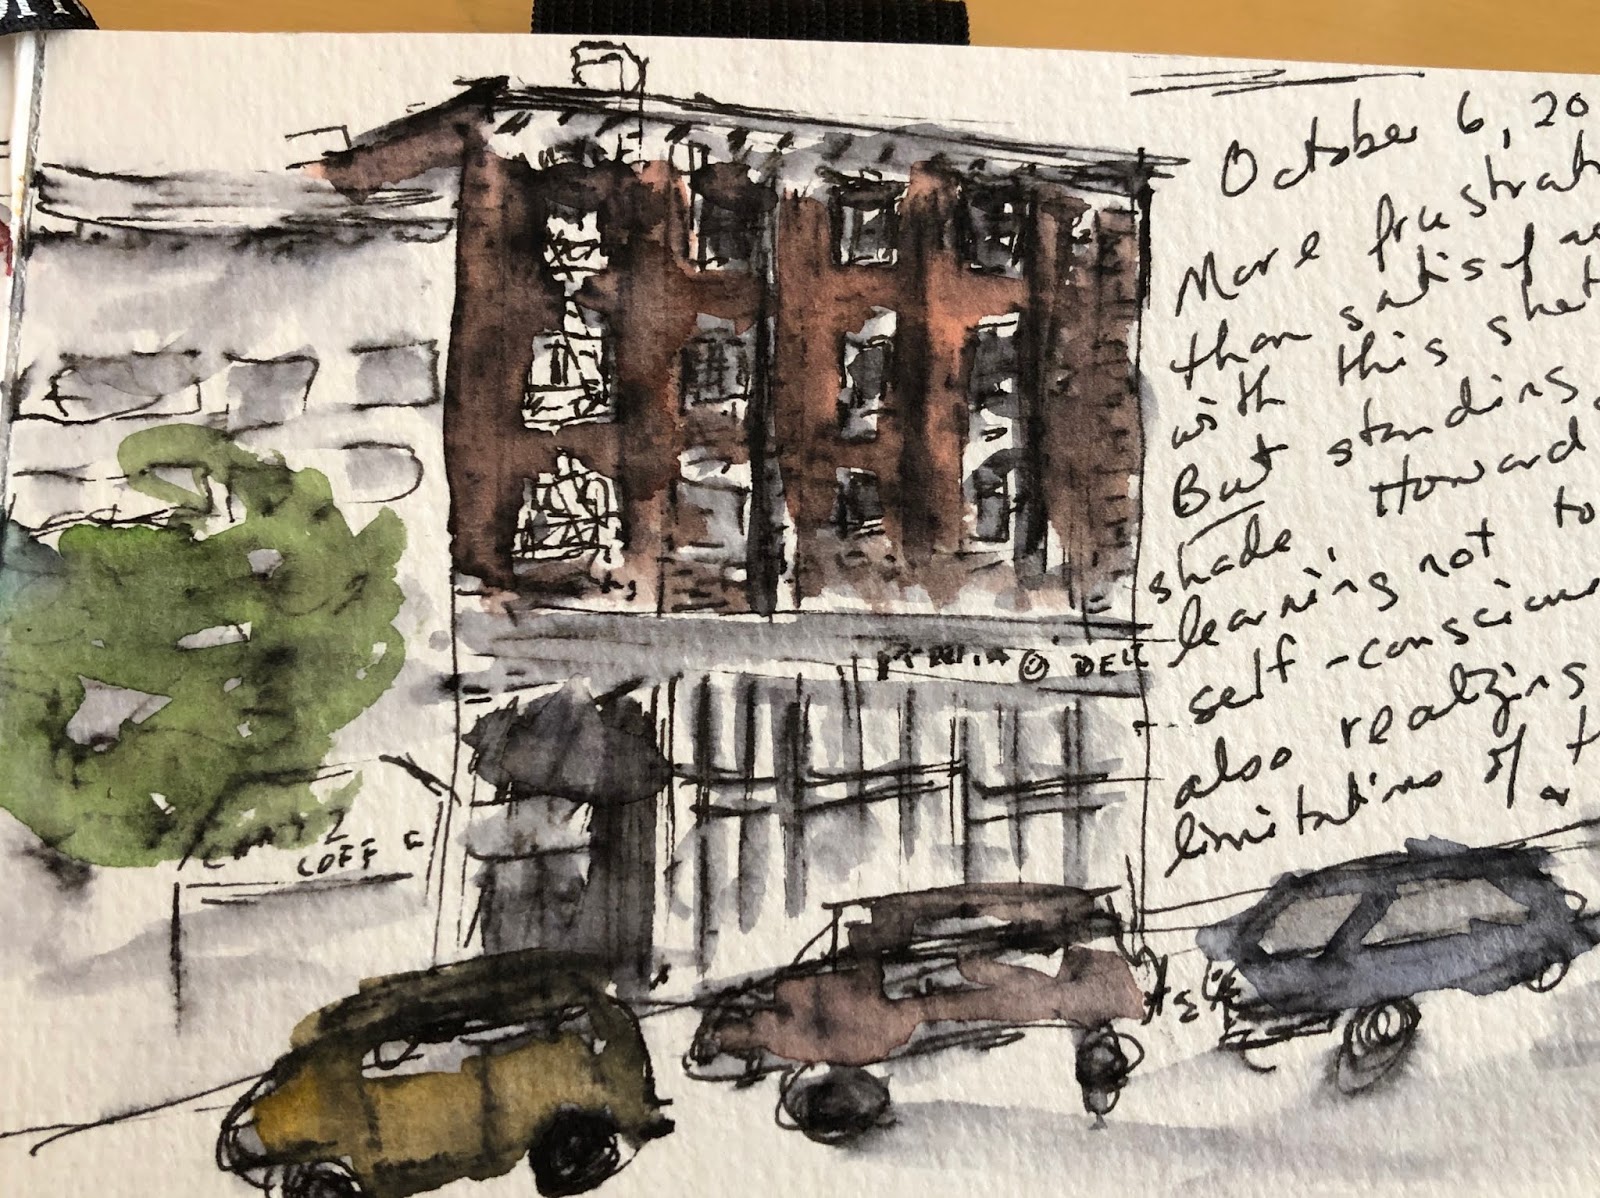 I Left my Voice in San Francisco (But I Brought Home Some Sketches)